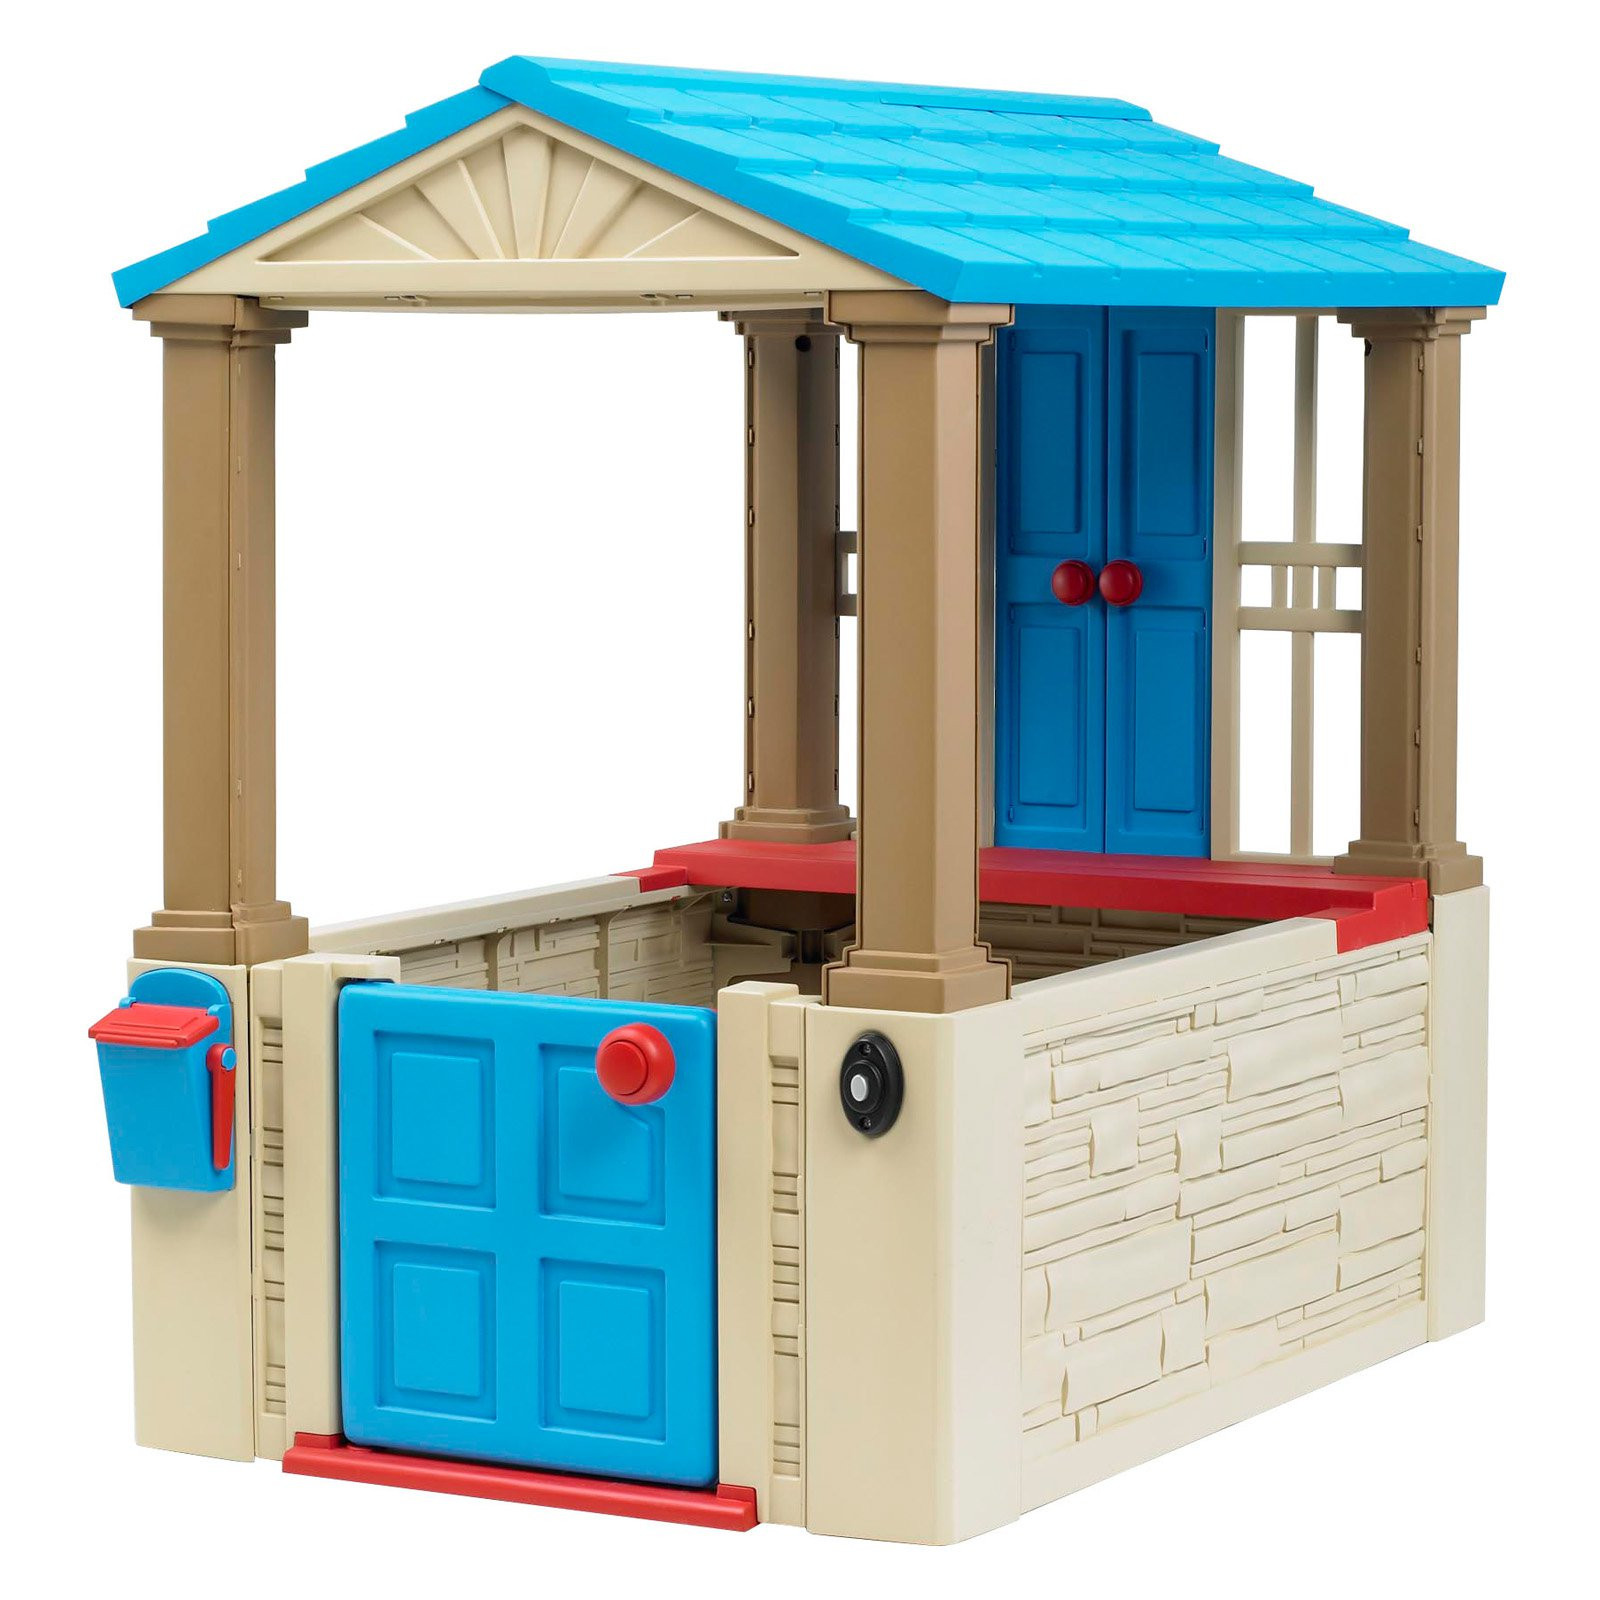 Kids Outdoor Plastic Playhouses Unique American Plastic Toys My First Playhouse Indoor Of Kids Outdoor Plastic Playhouses 